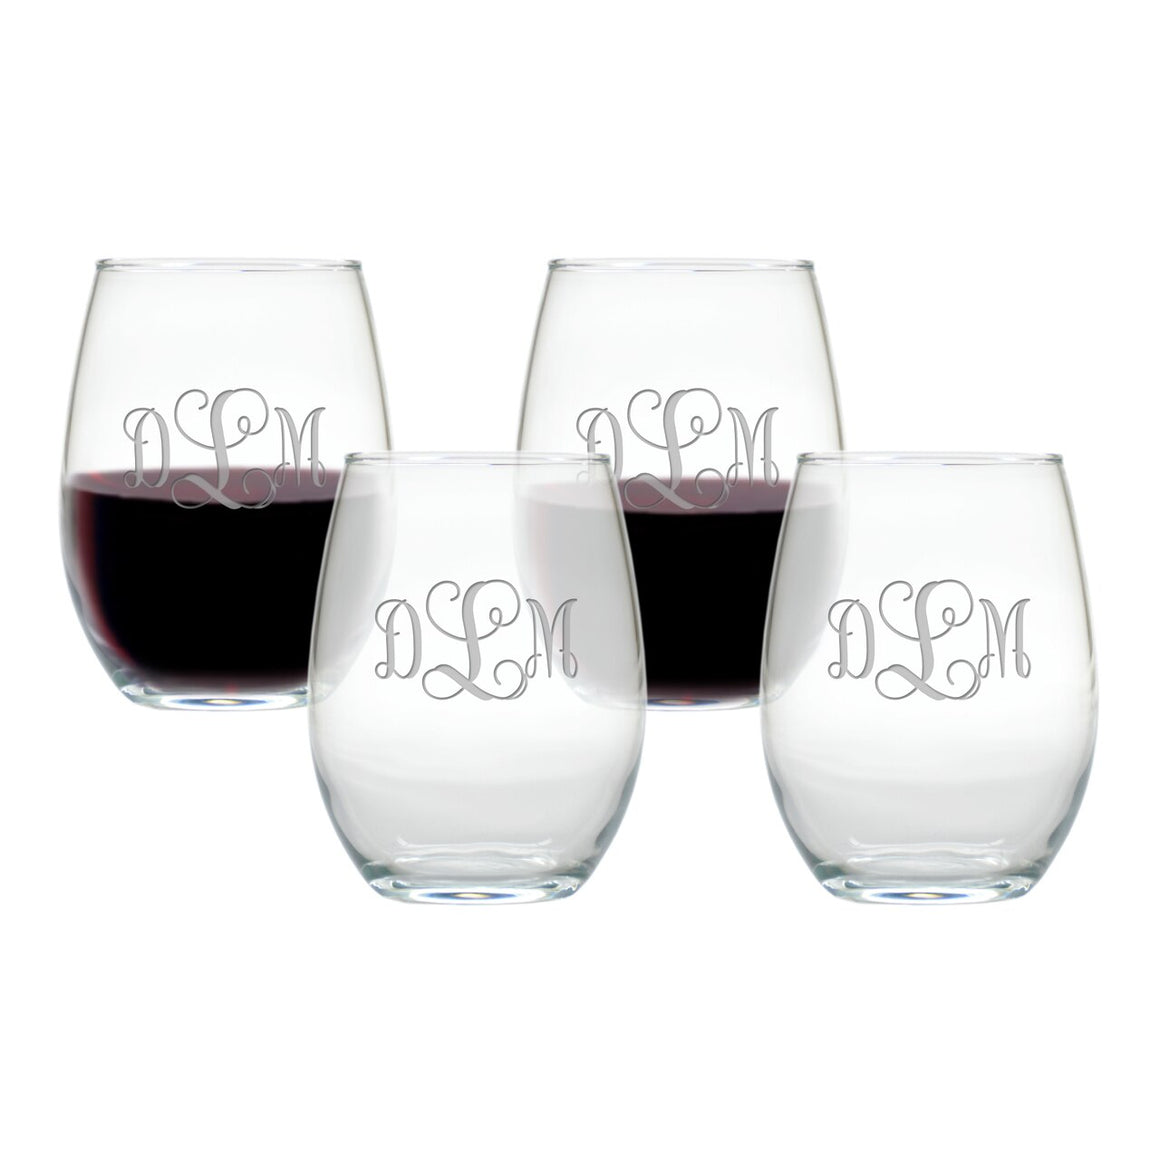 Personalized Stemless Wine Glasses - Set of 4